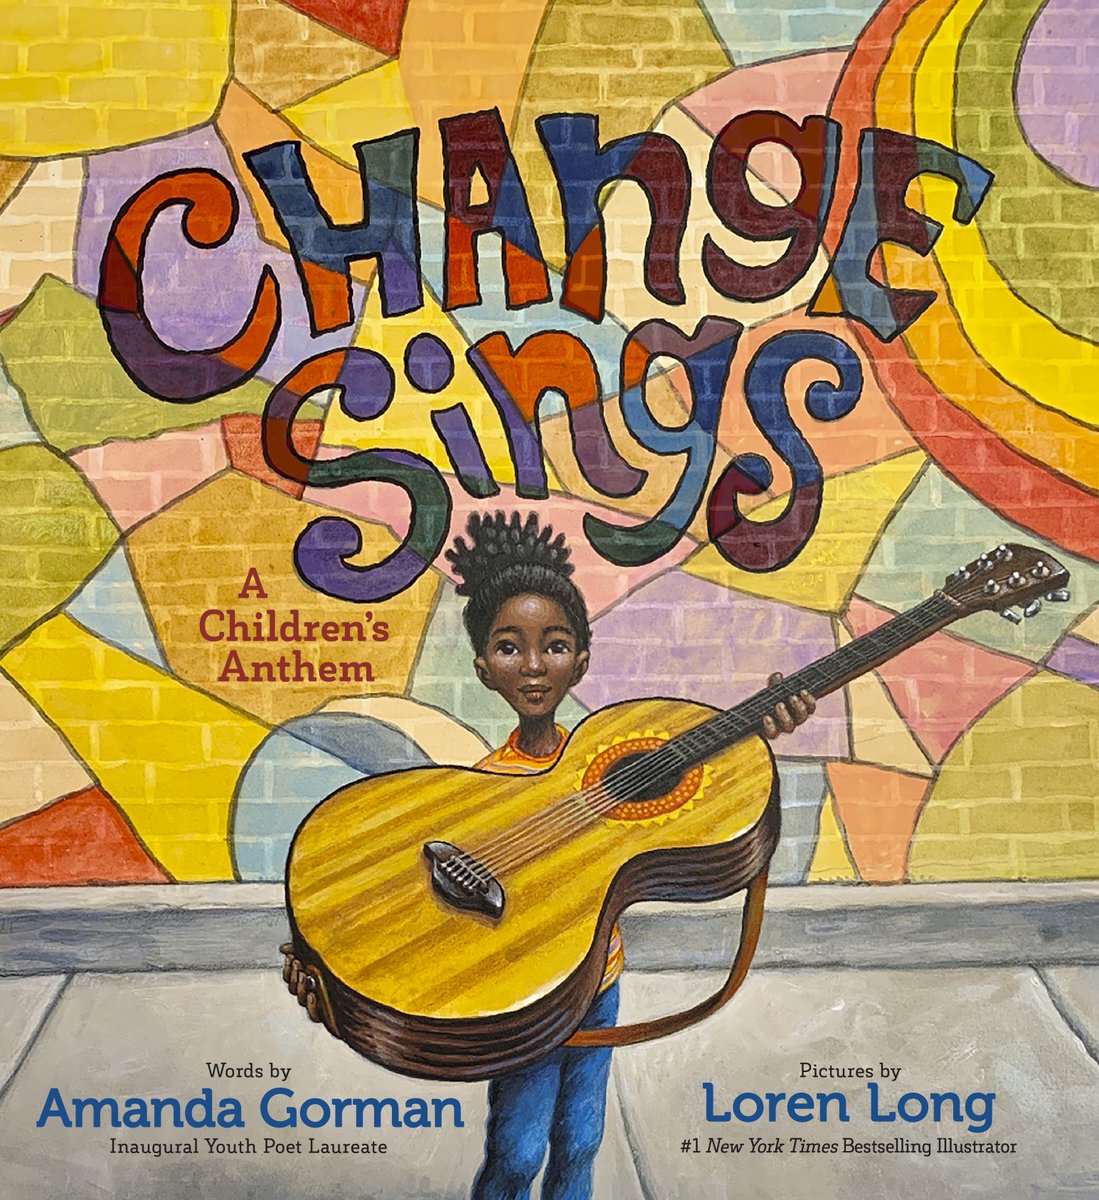 “I can hear change humming In its loudest, proudest song. I don’t fear change coming, And so I sing along.” -Inaugural National Youth Poet Laureate @TheAmandaGorman, from Change Sings